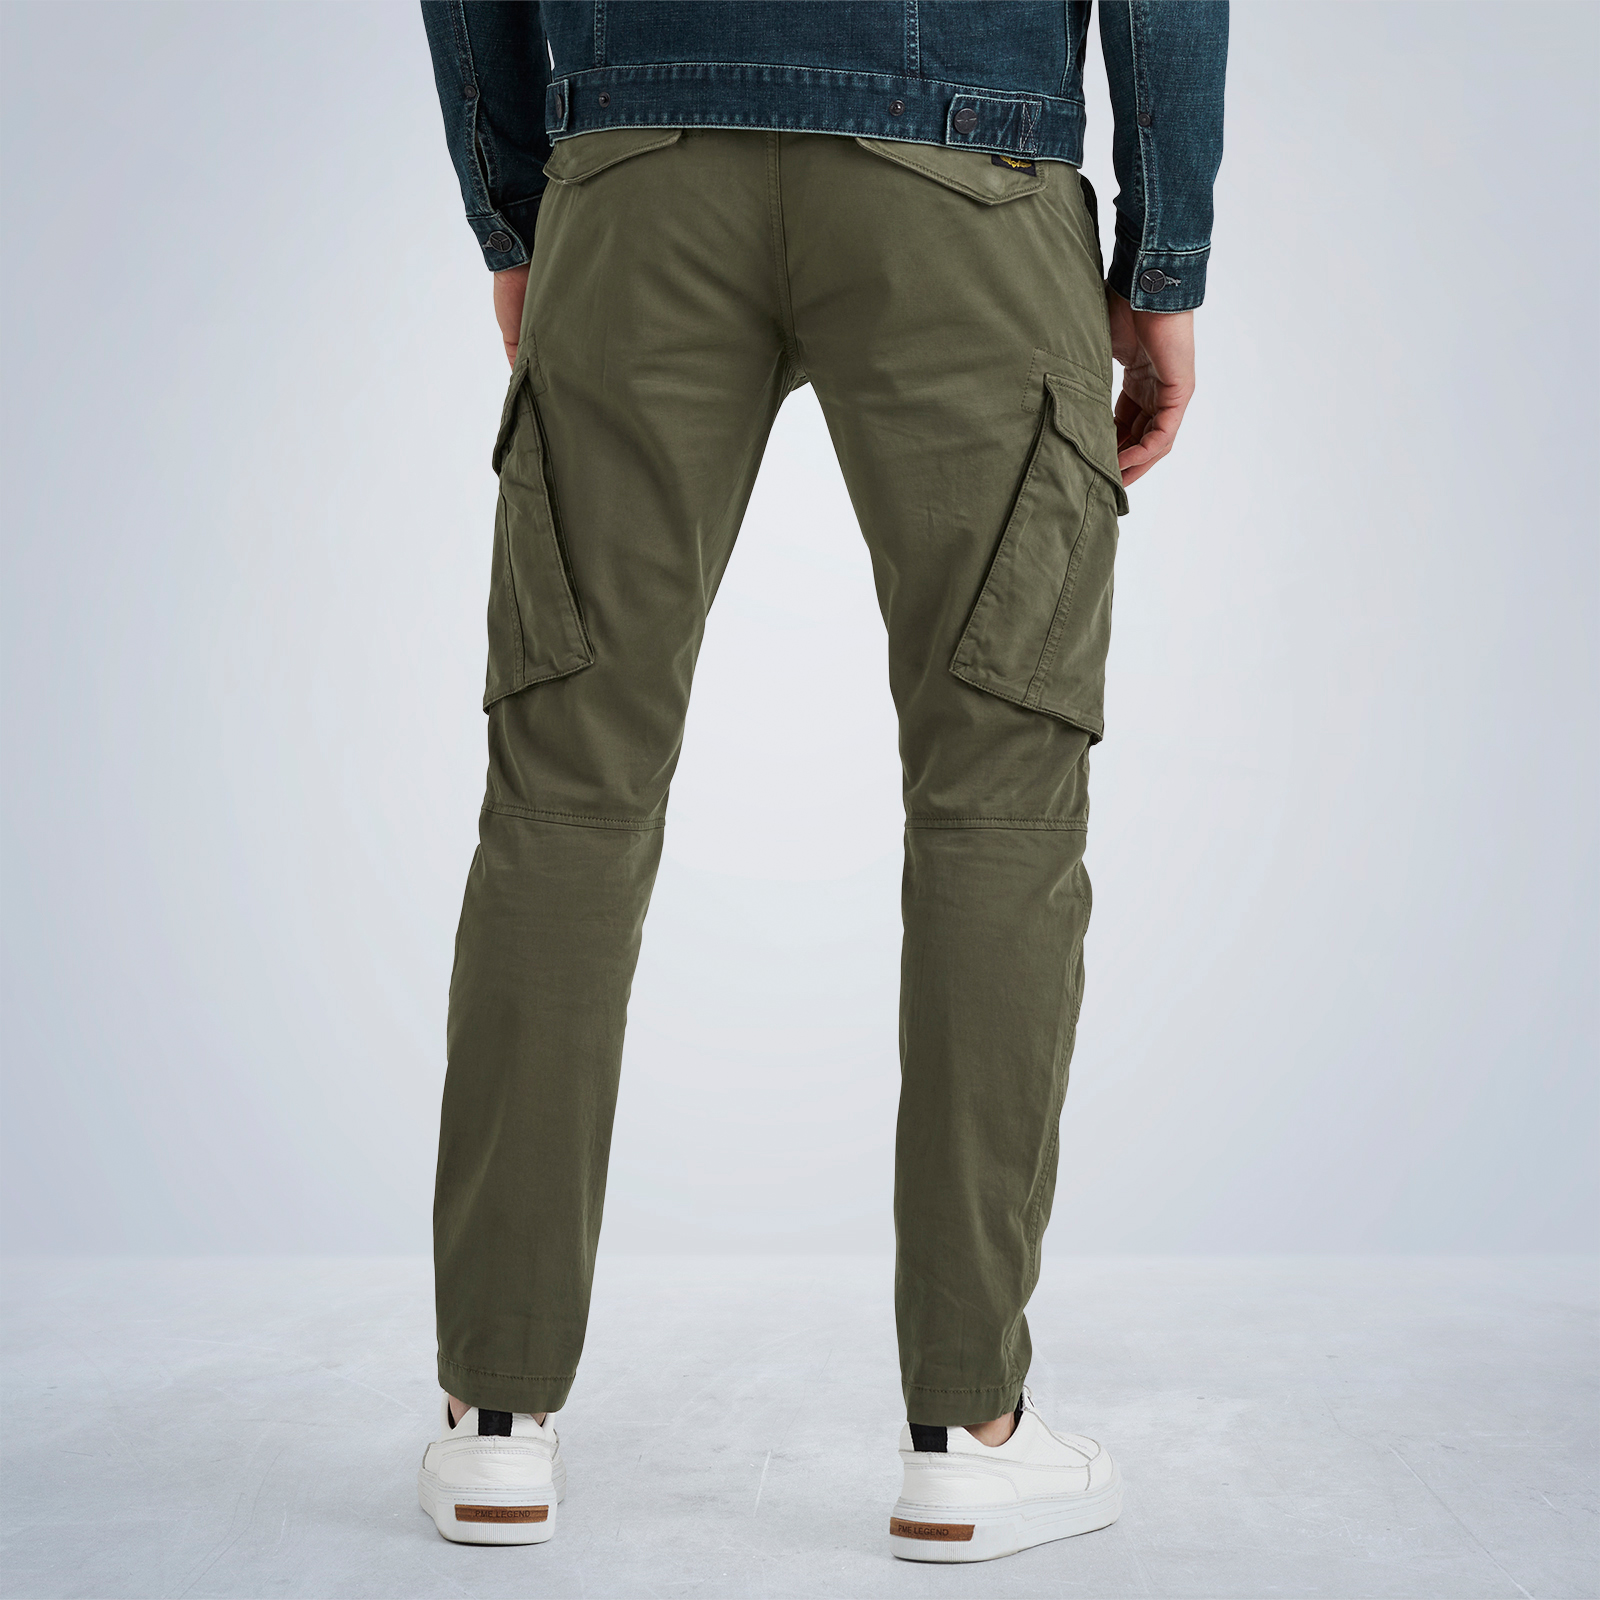 Nordrop cargo returns fit Free and pants | - shipping PME LEGEND tapered